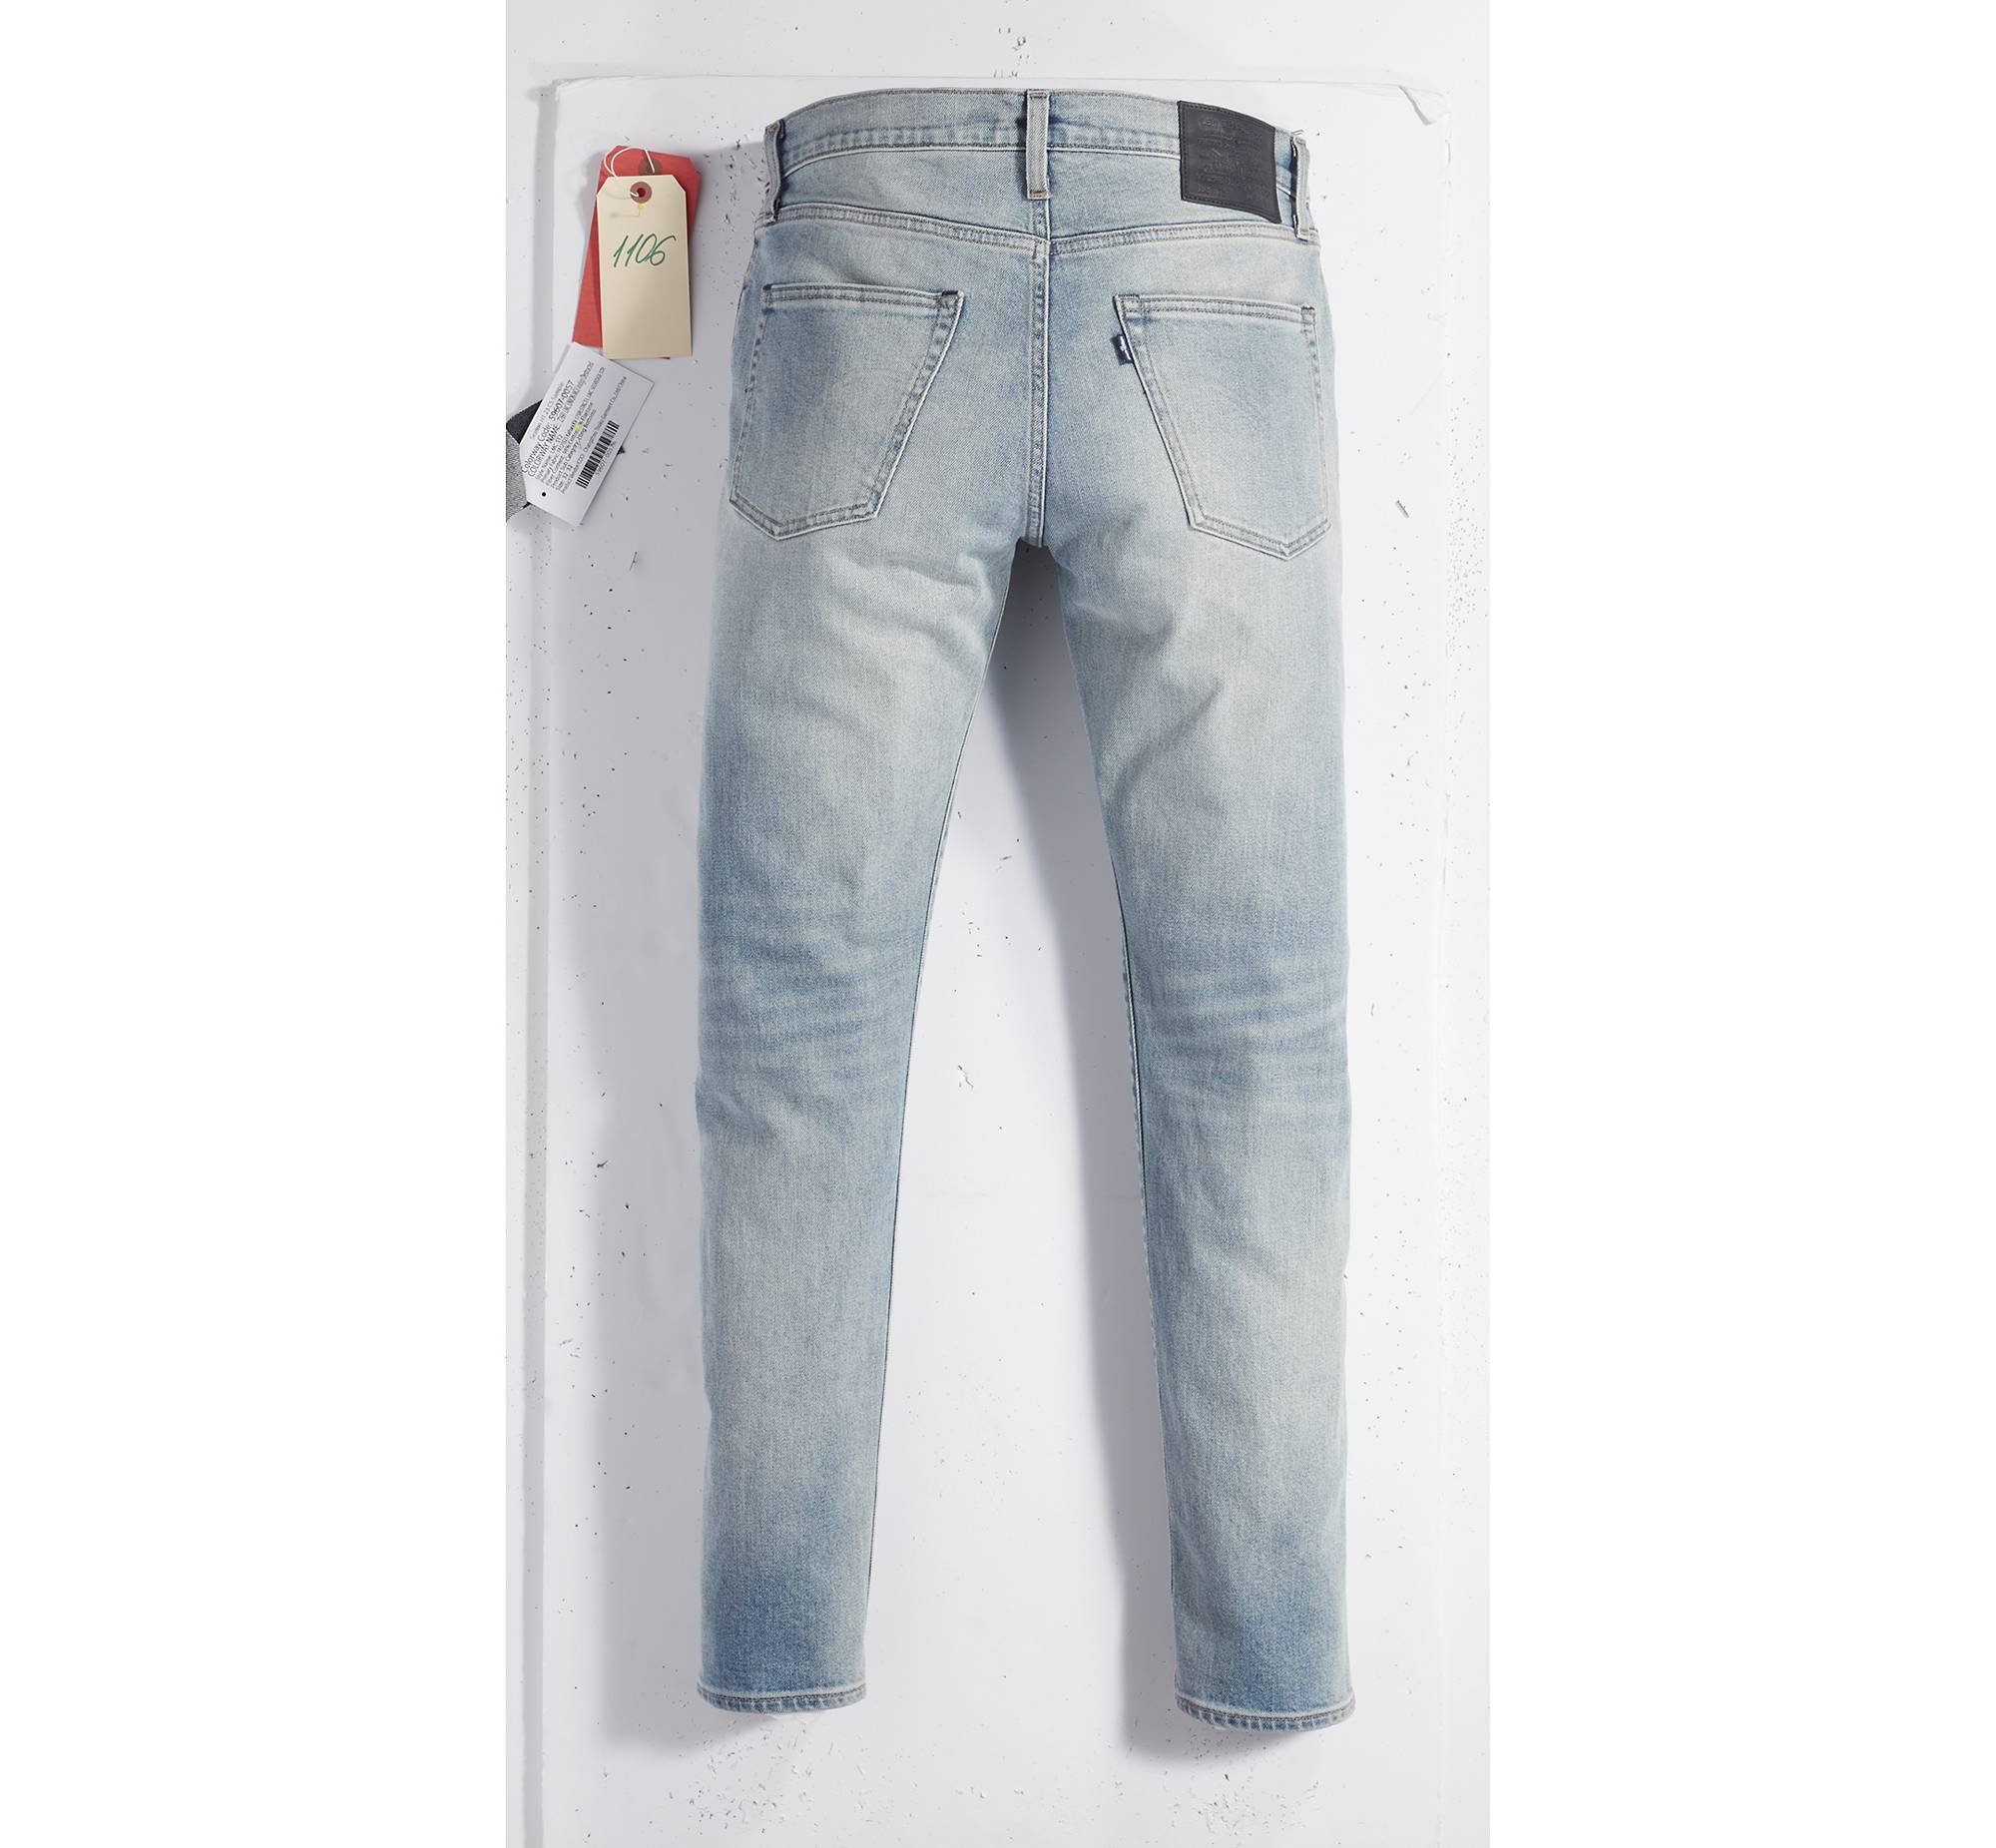 Levi's® Made & Crafted® 512™ Slim Tapered Jeans 7